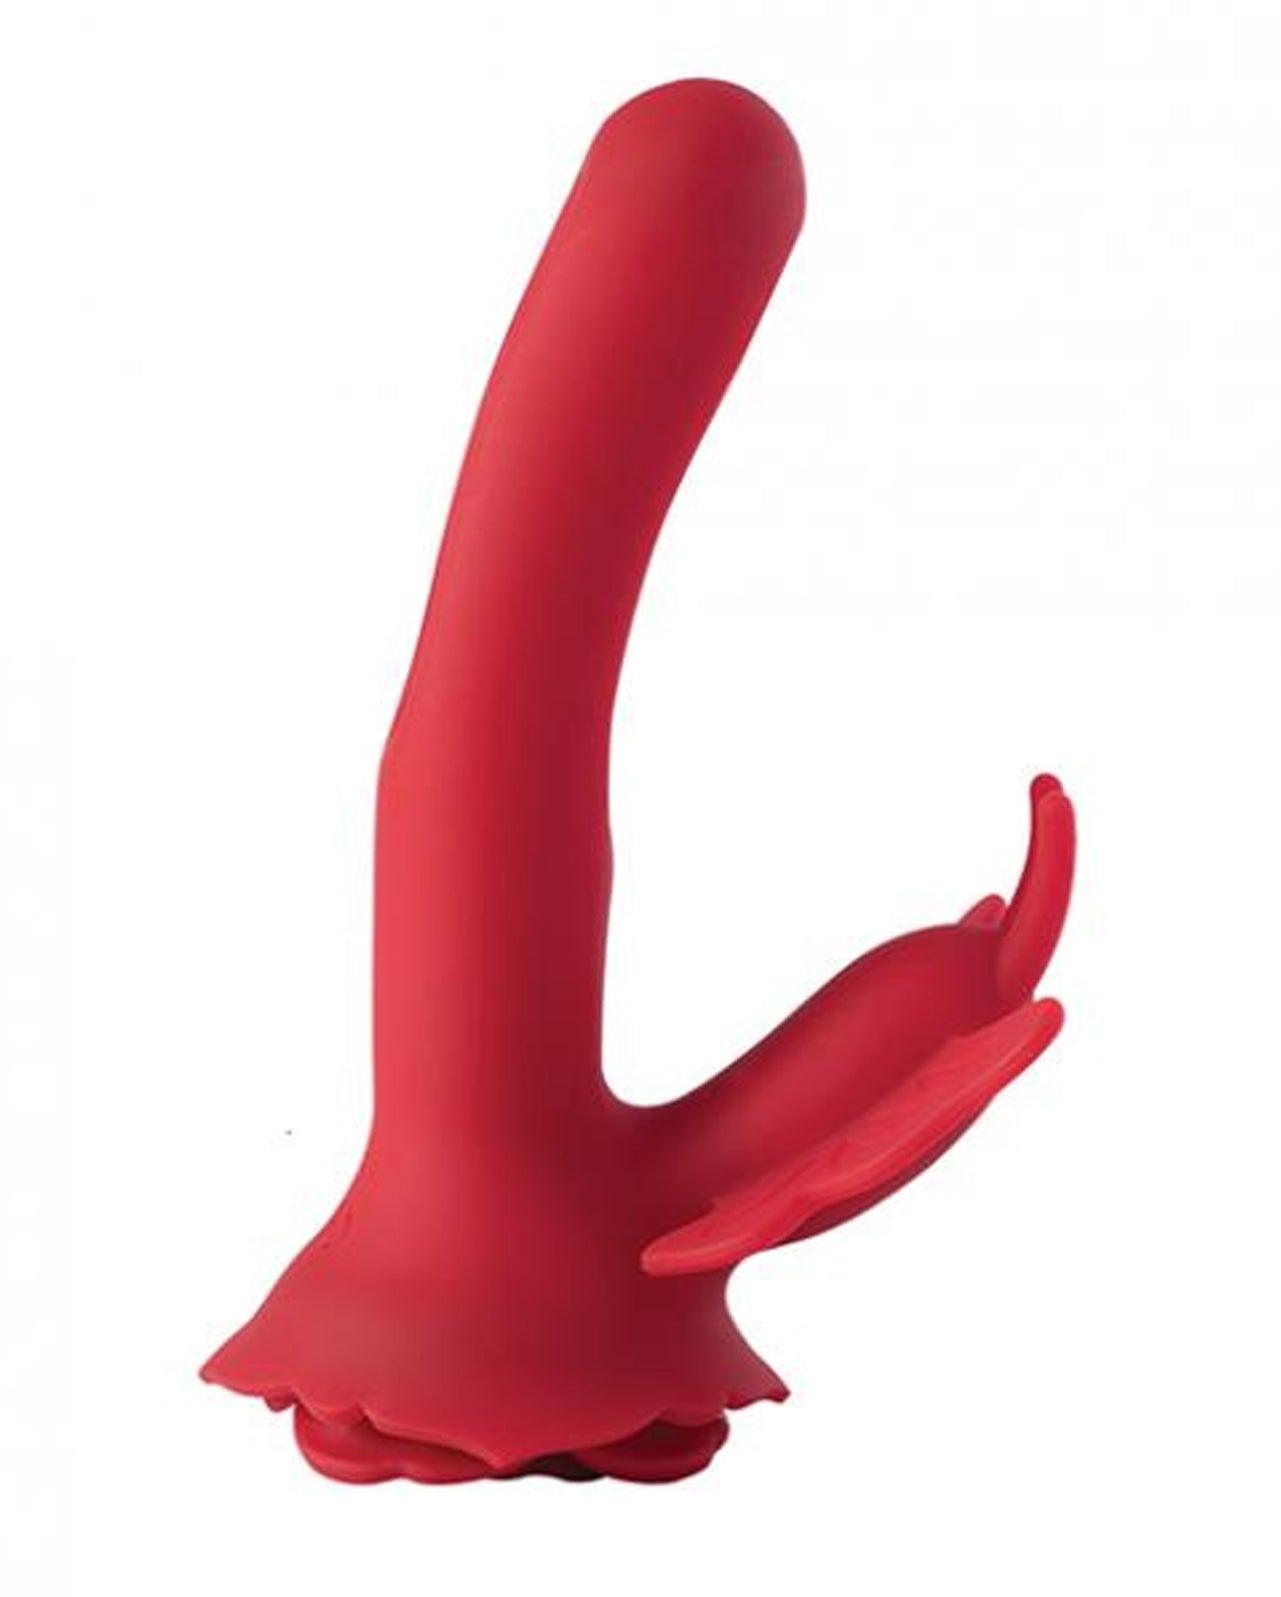 Layla - Butterfly Clit and G-Spot Vibrator - Red - My Sex Toy Hub